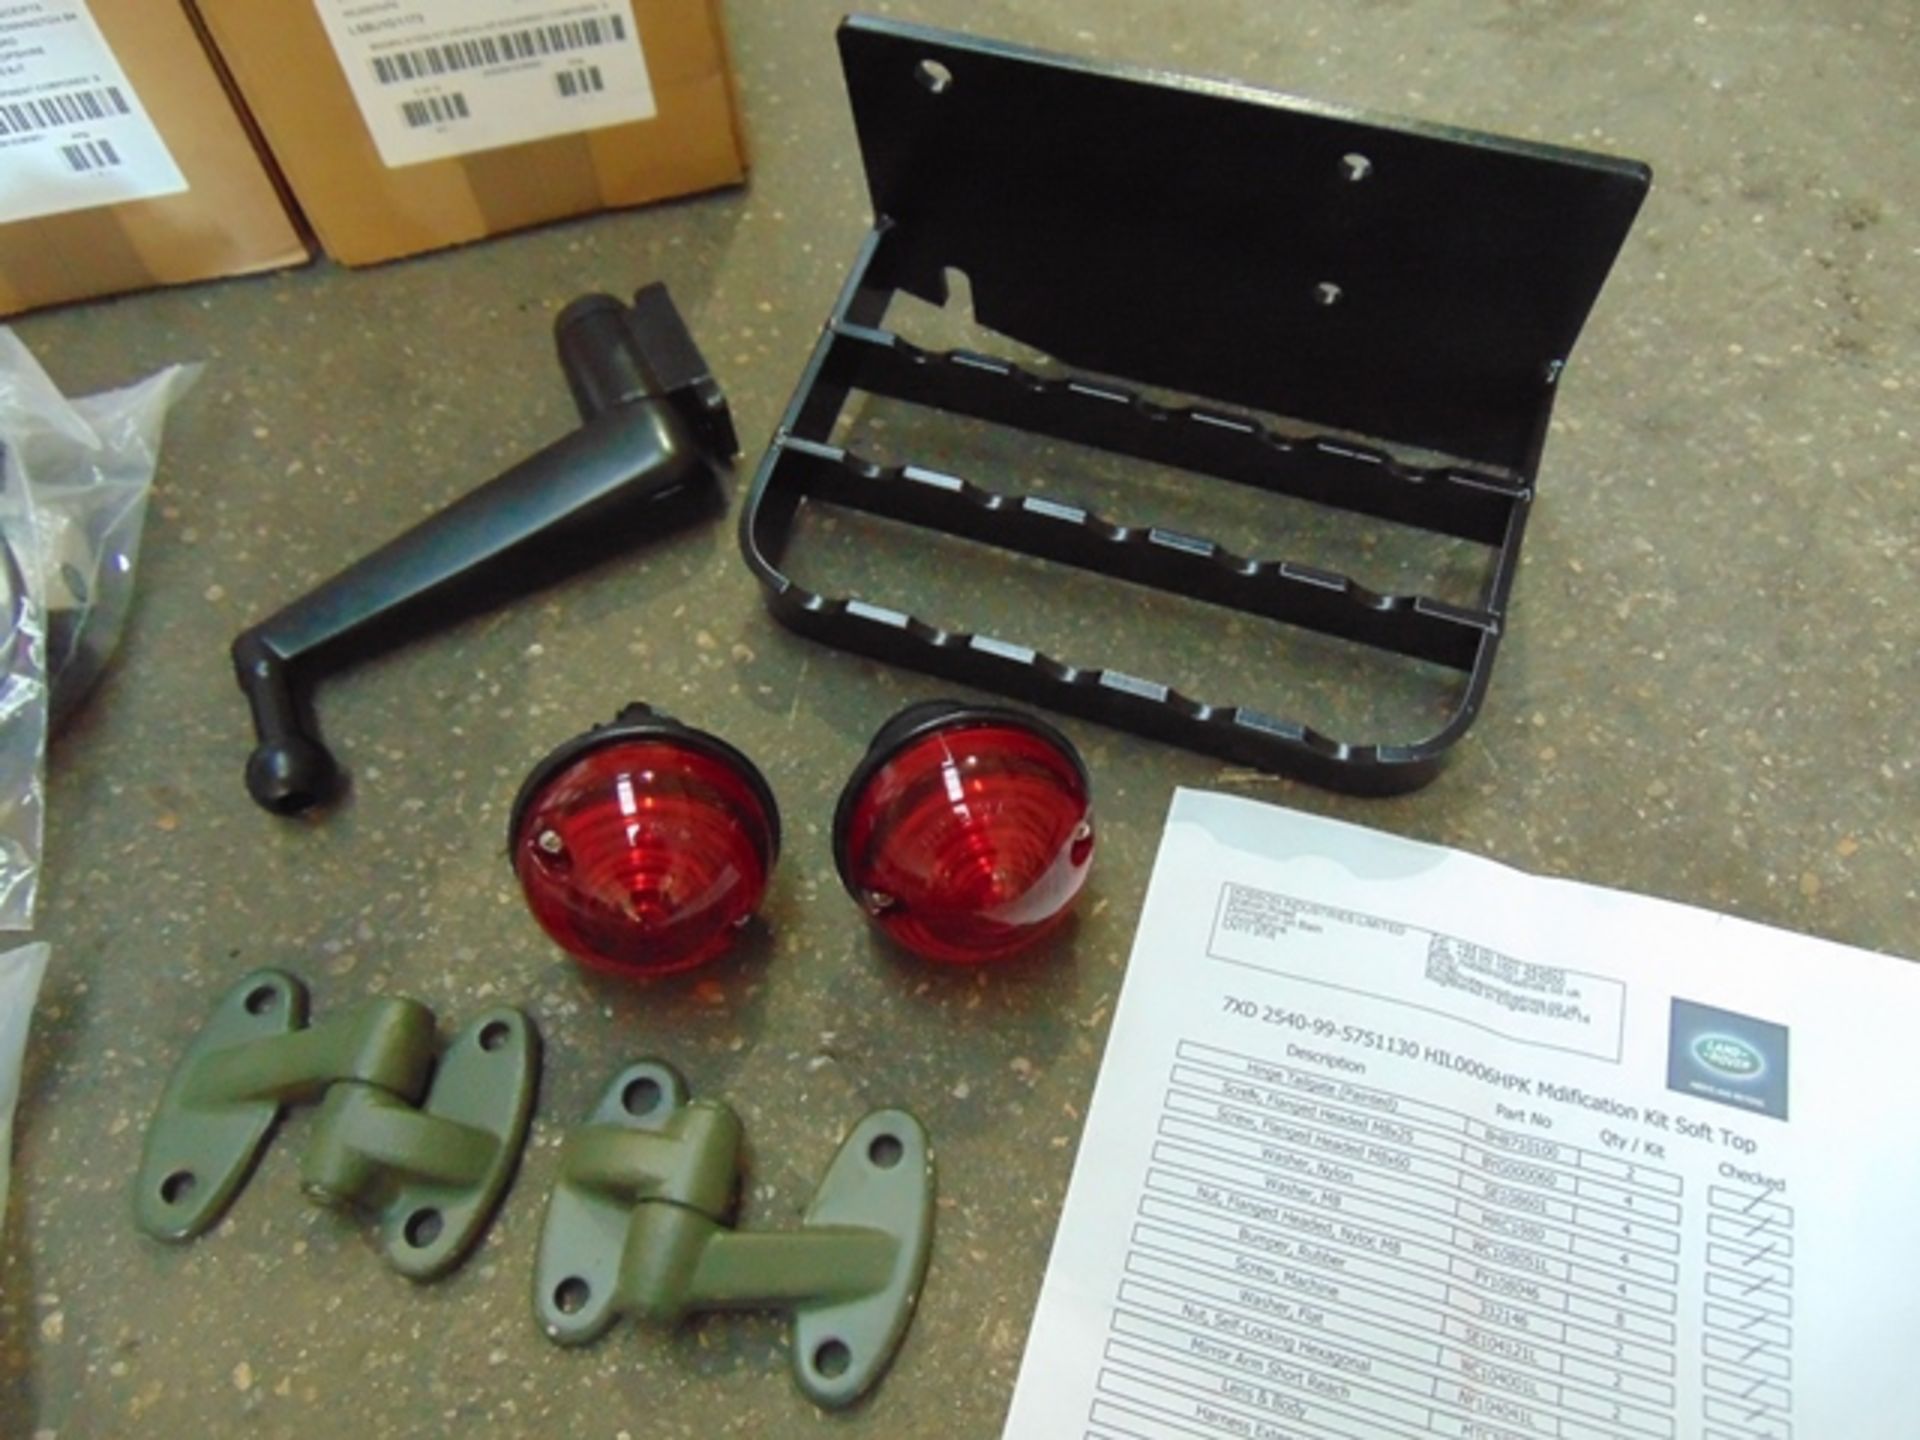 10 x Land Rover 90/110 Soft Top Modification Kits - Image 3 of 4